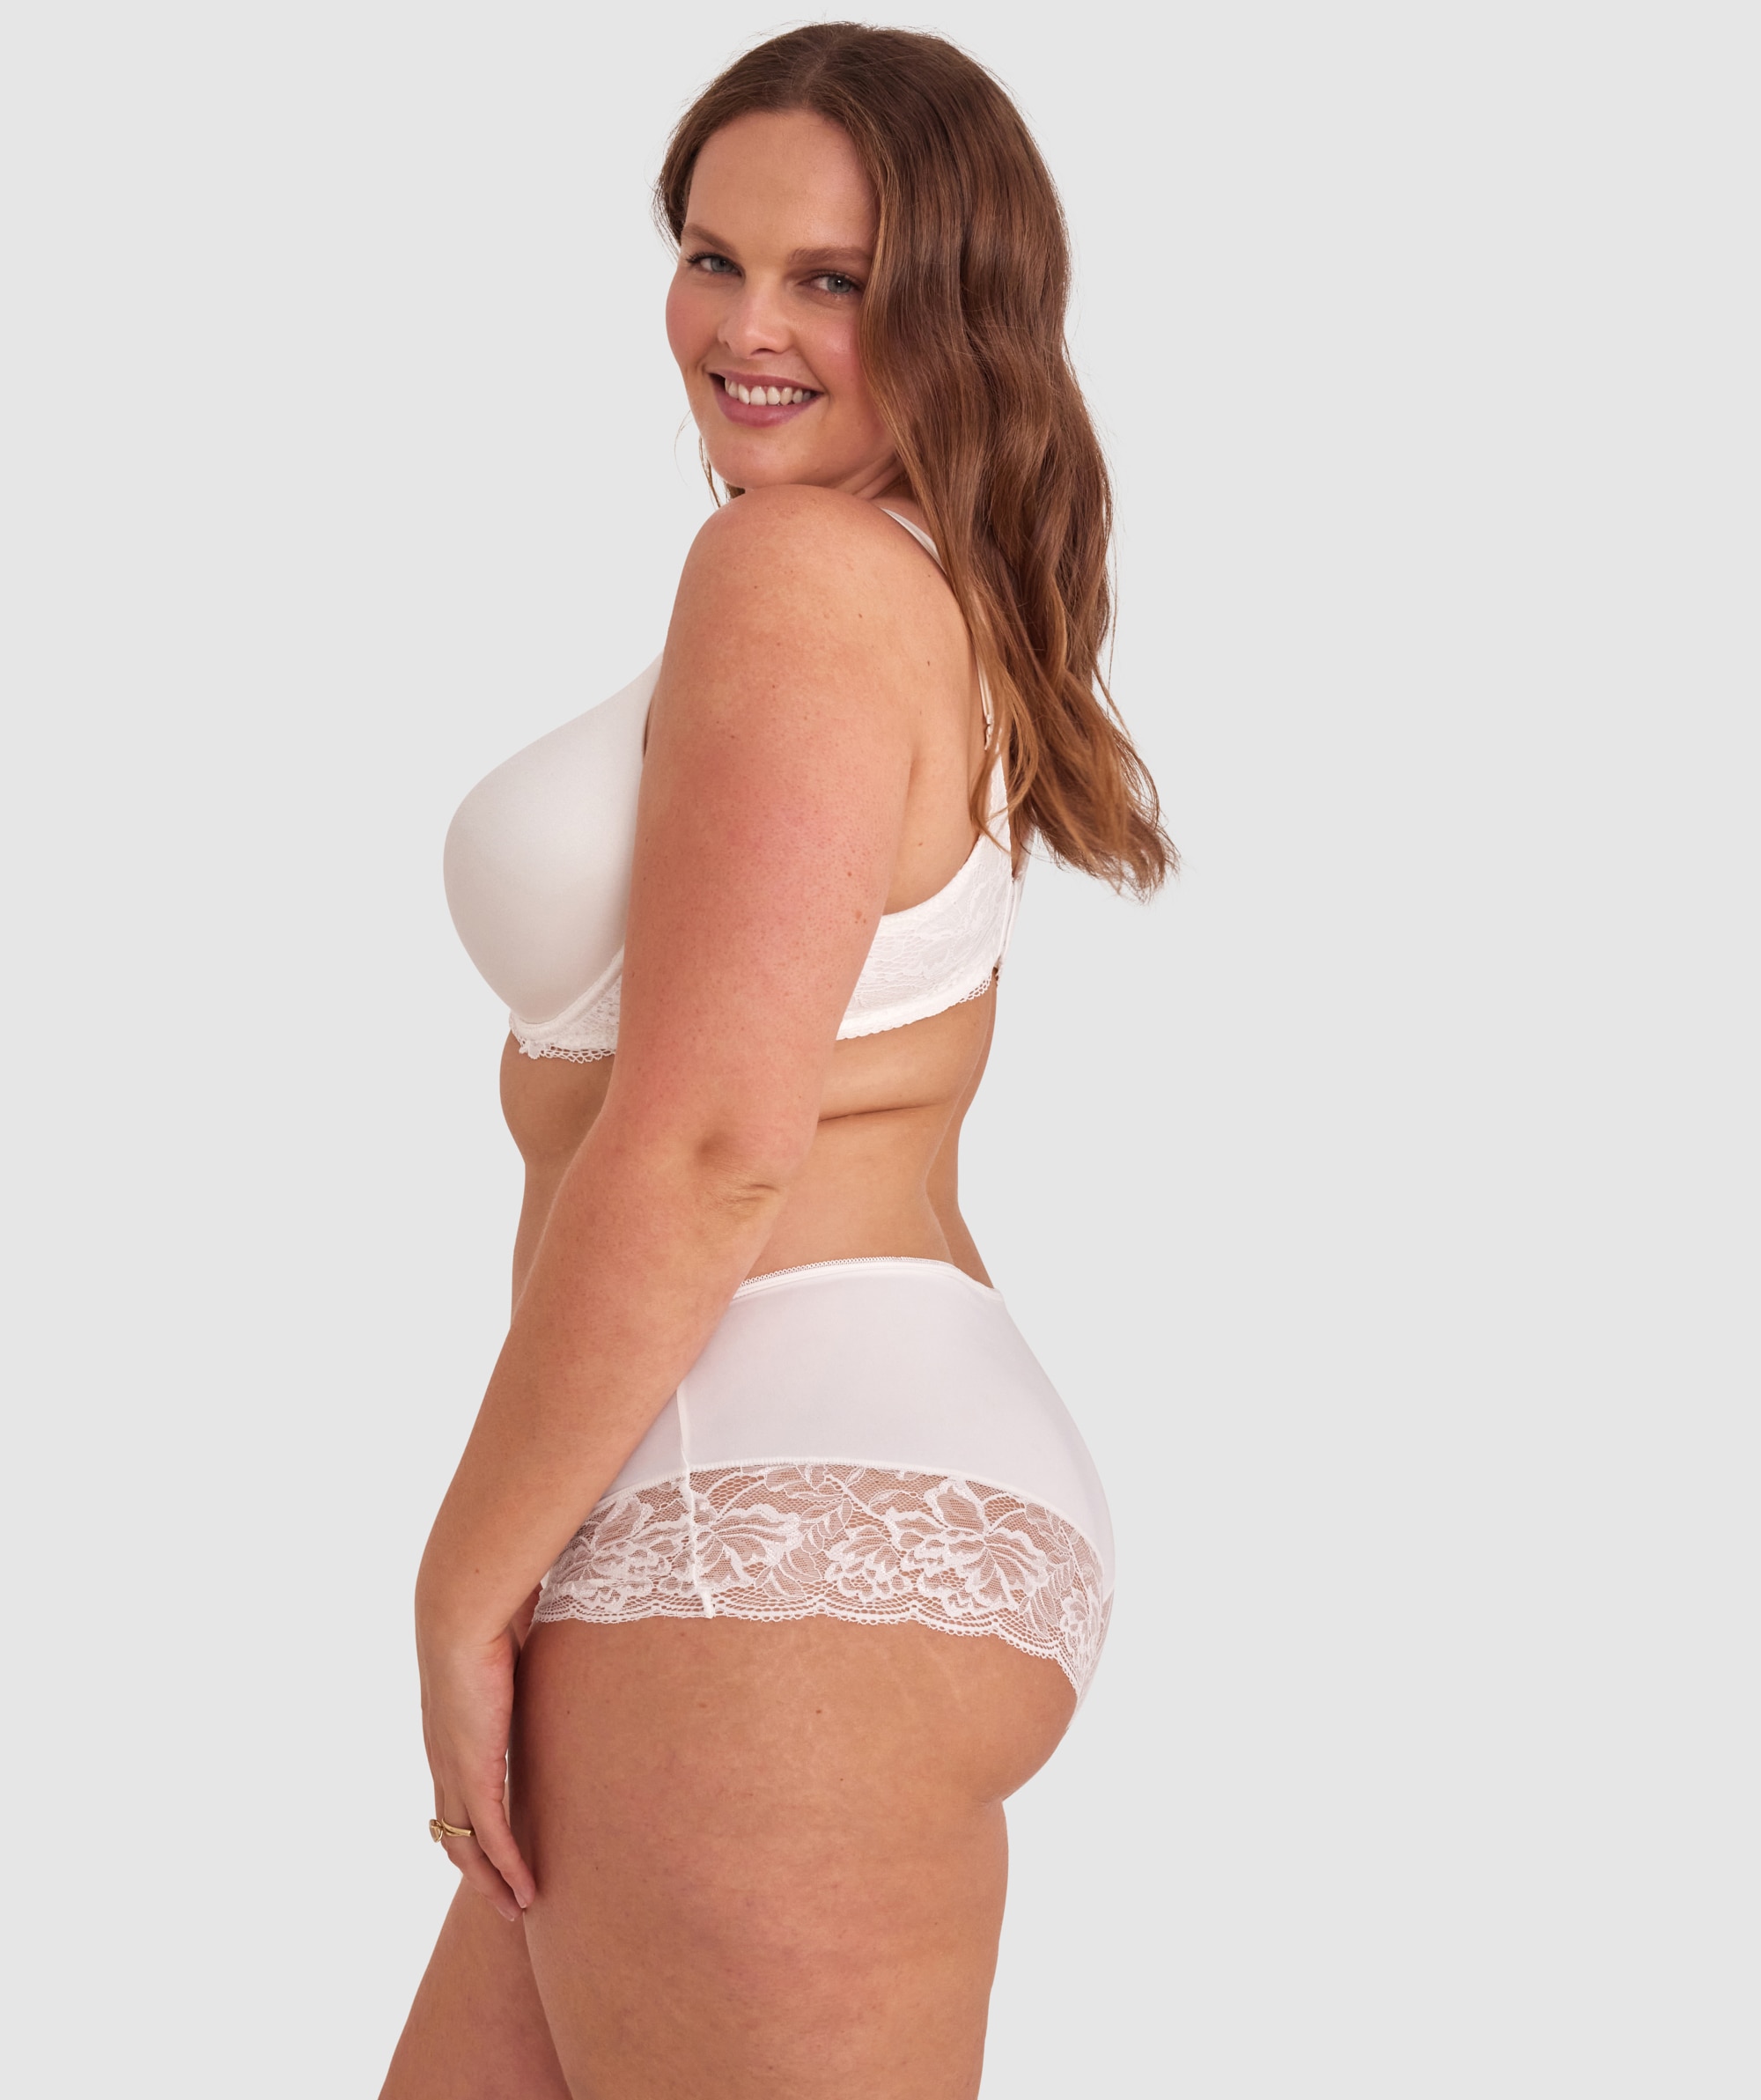 Body Bliss Lace Full Cup Bra - Ivory